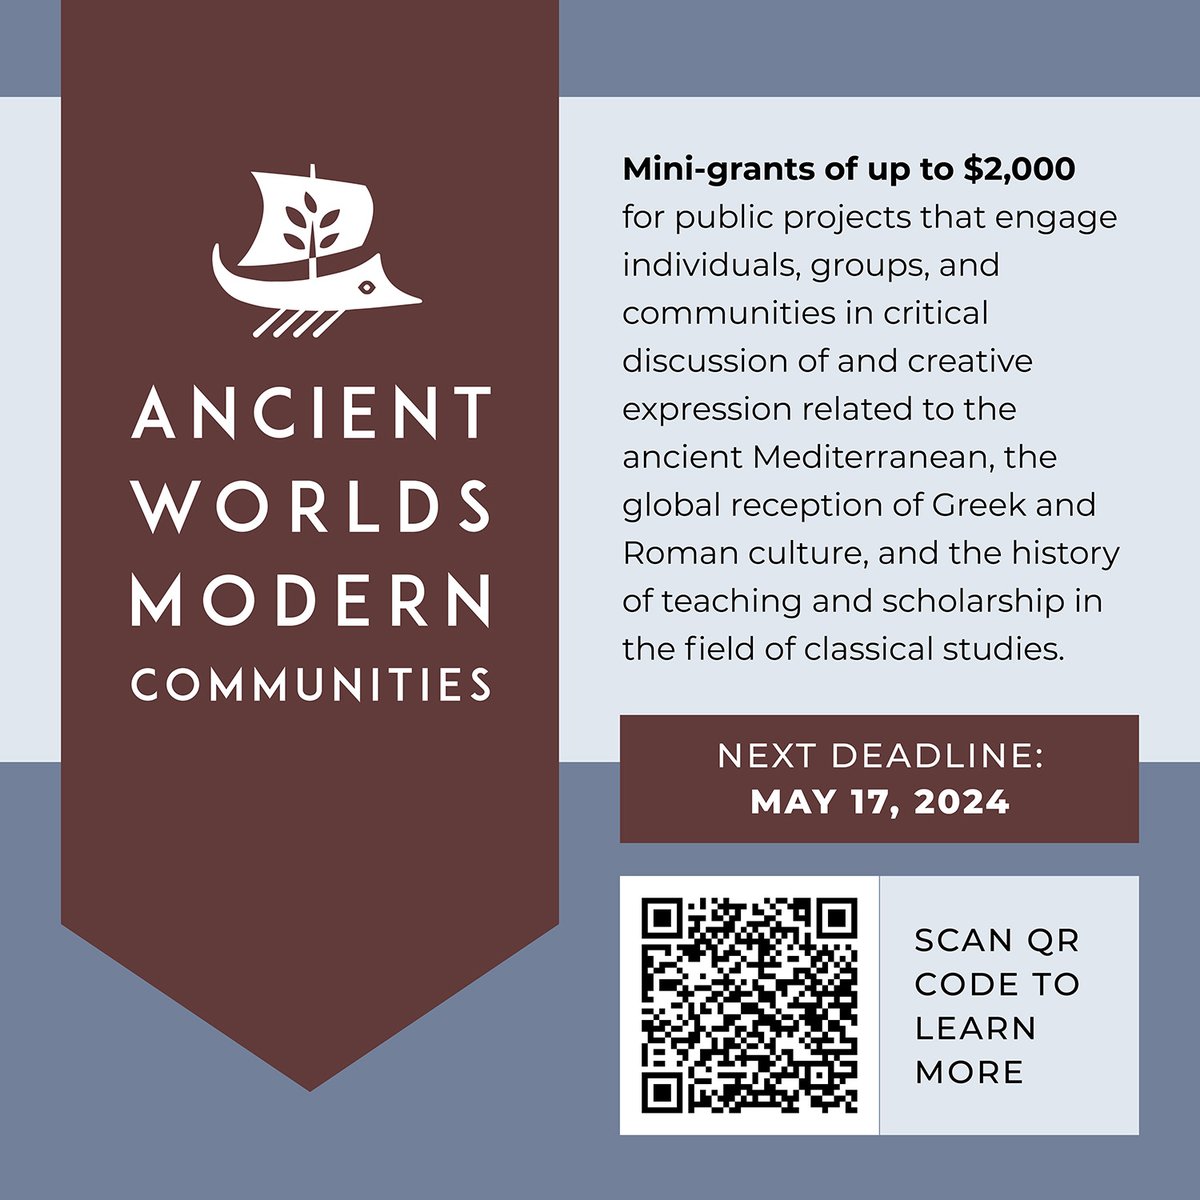 The Ancient Worlds, Modern Communities initiative provides mini-grants of up to $2,000 to support public engagement projects. The next deadline is one month away, May 17, 2024! classicalstudies.org/outreach/ancie…